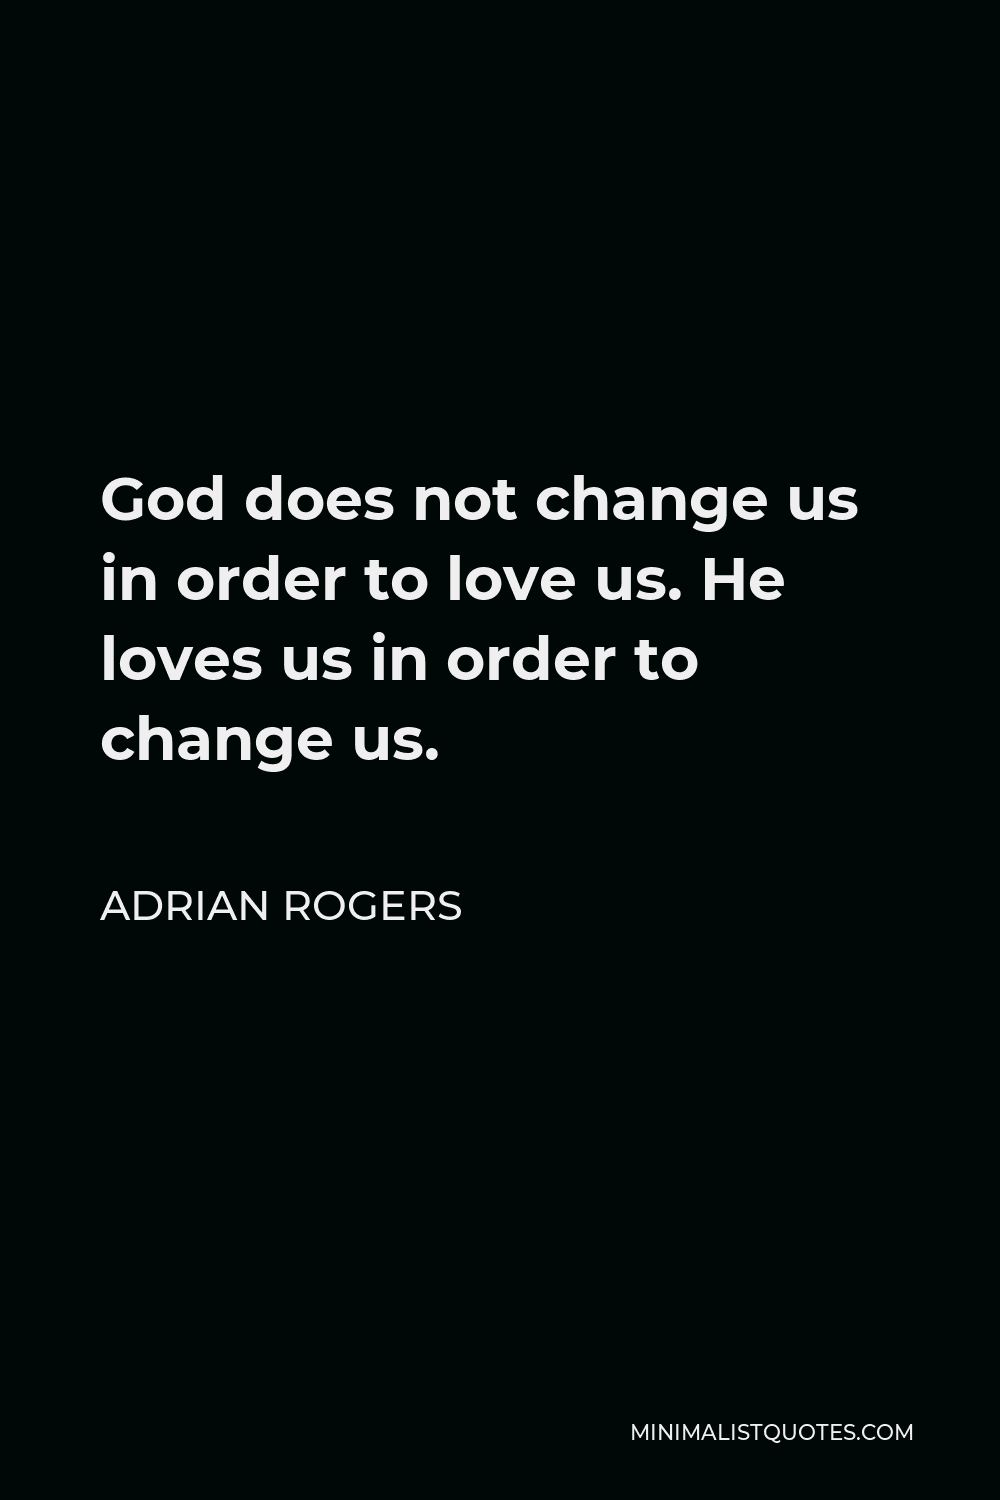 Adrian Rogers Quote - God does not change us in order to love us. He loves us in order to change us.